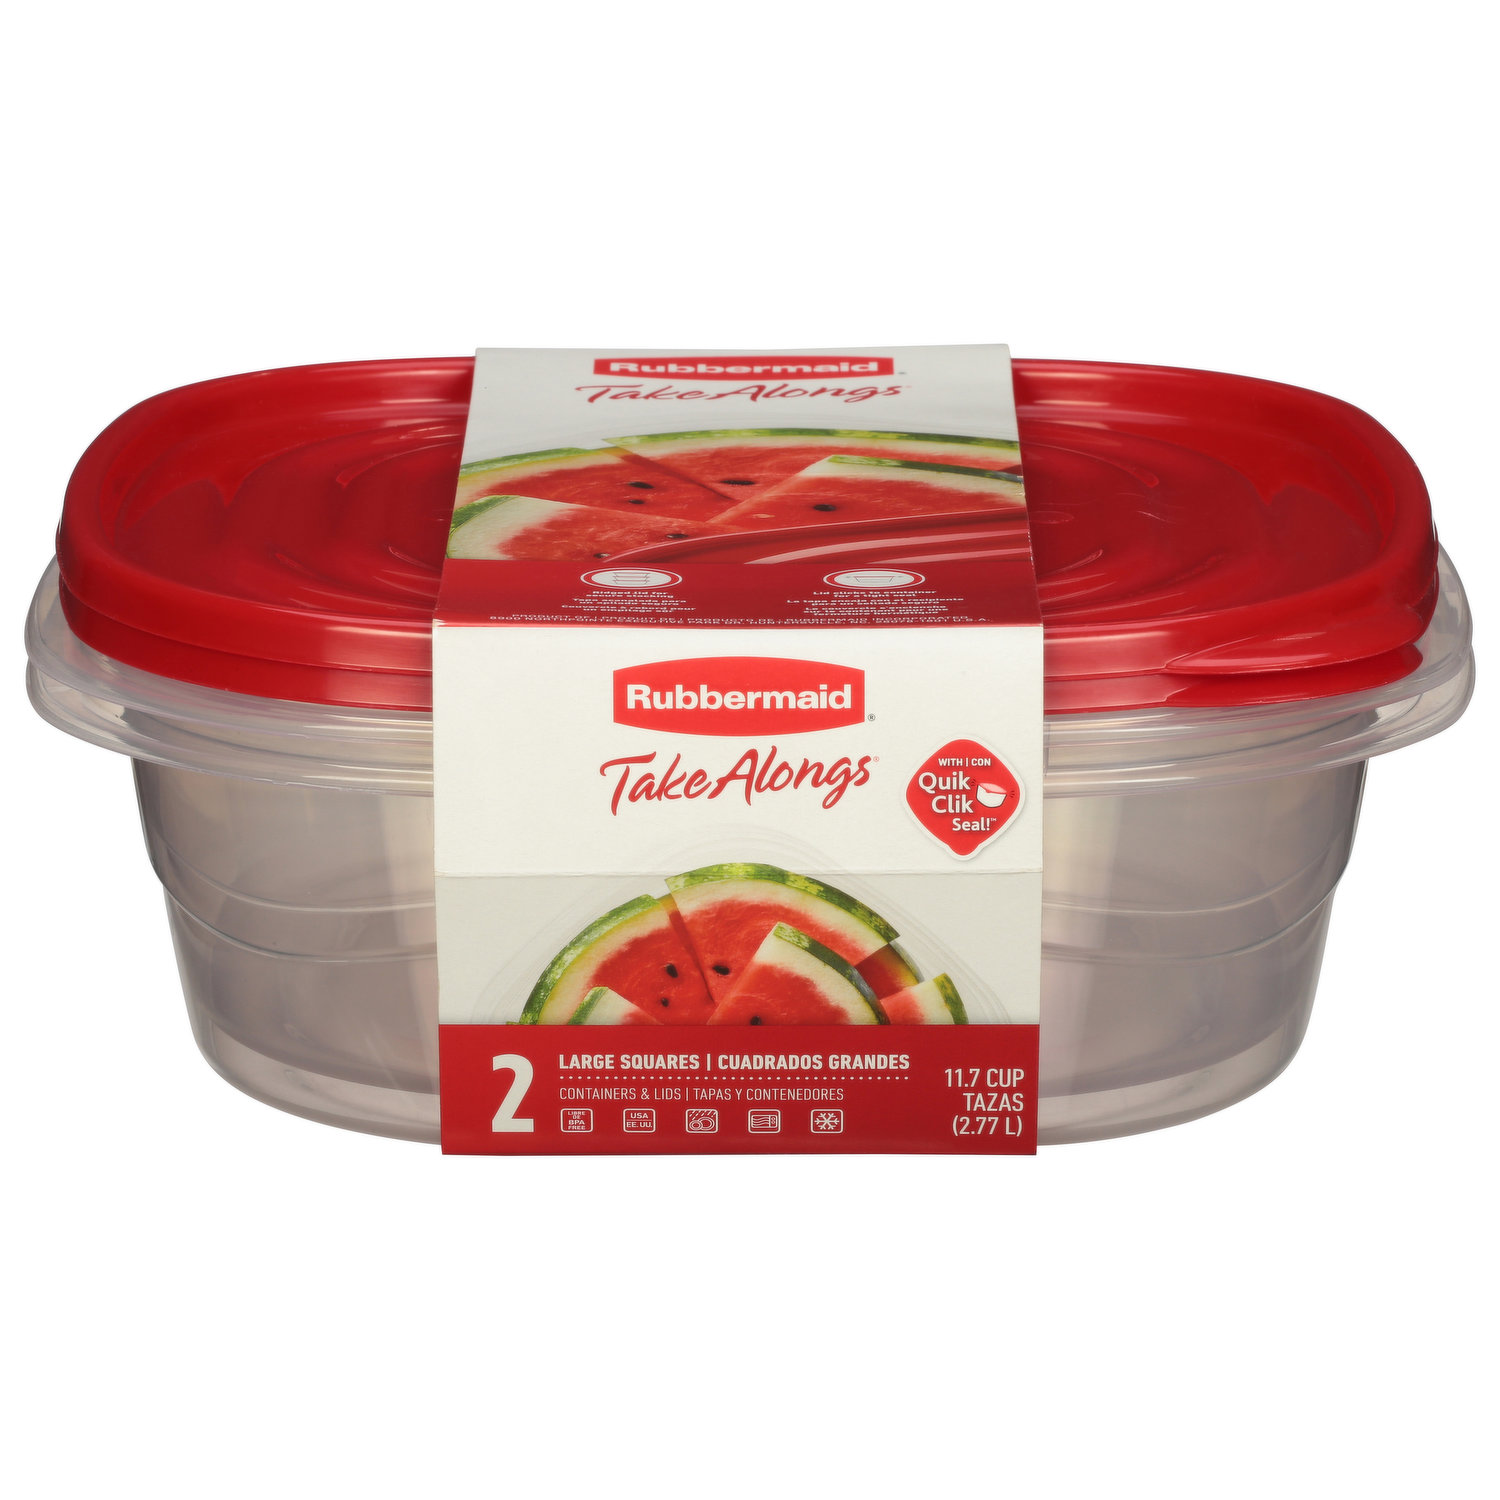 Rubbermaid Easy Find Lids Food Storage Container, Large with Red Lid, 2.5  Gallon